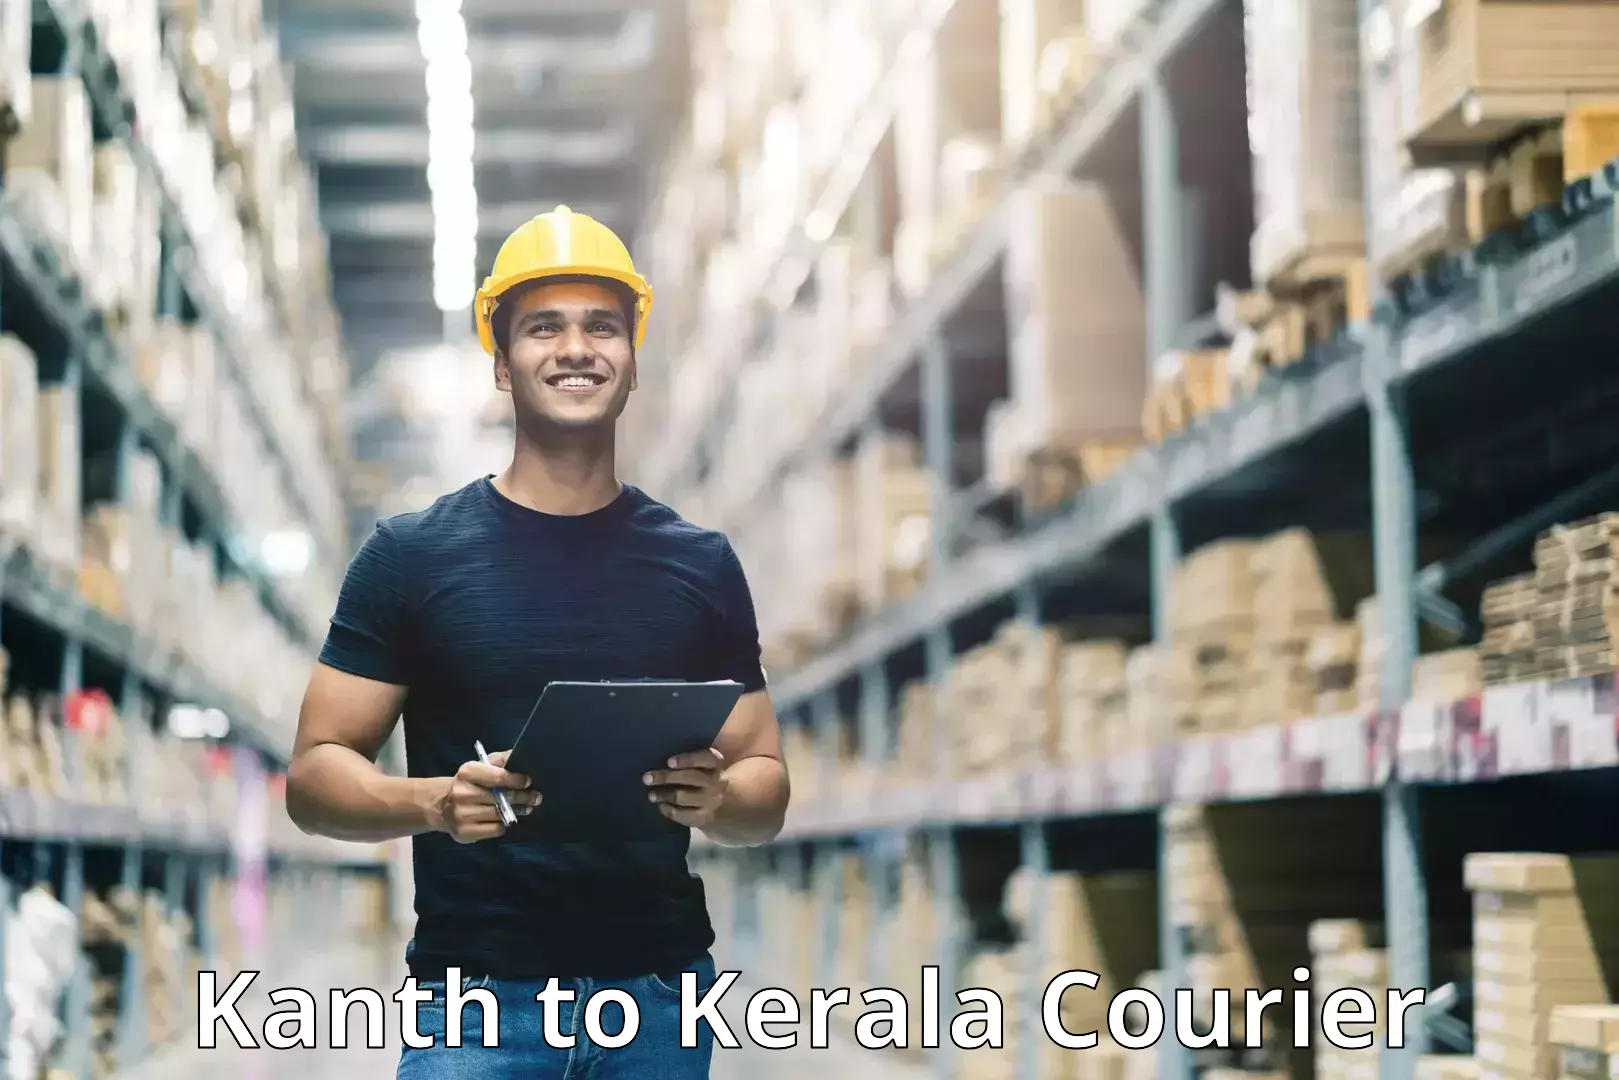 Enhanced tracking features Kanth to Kerala